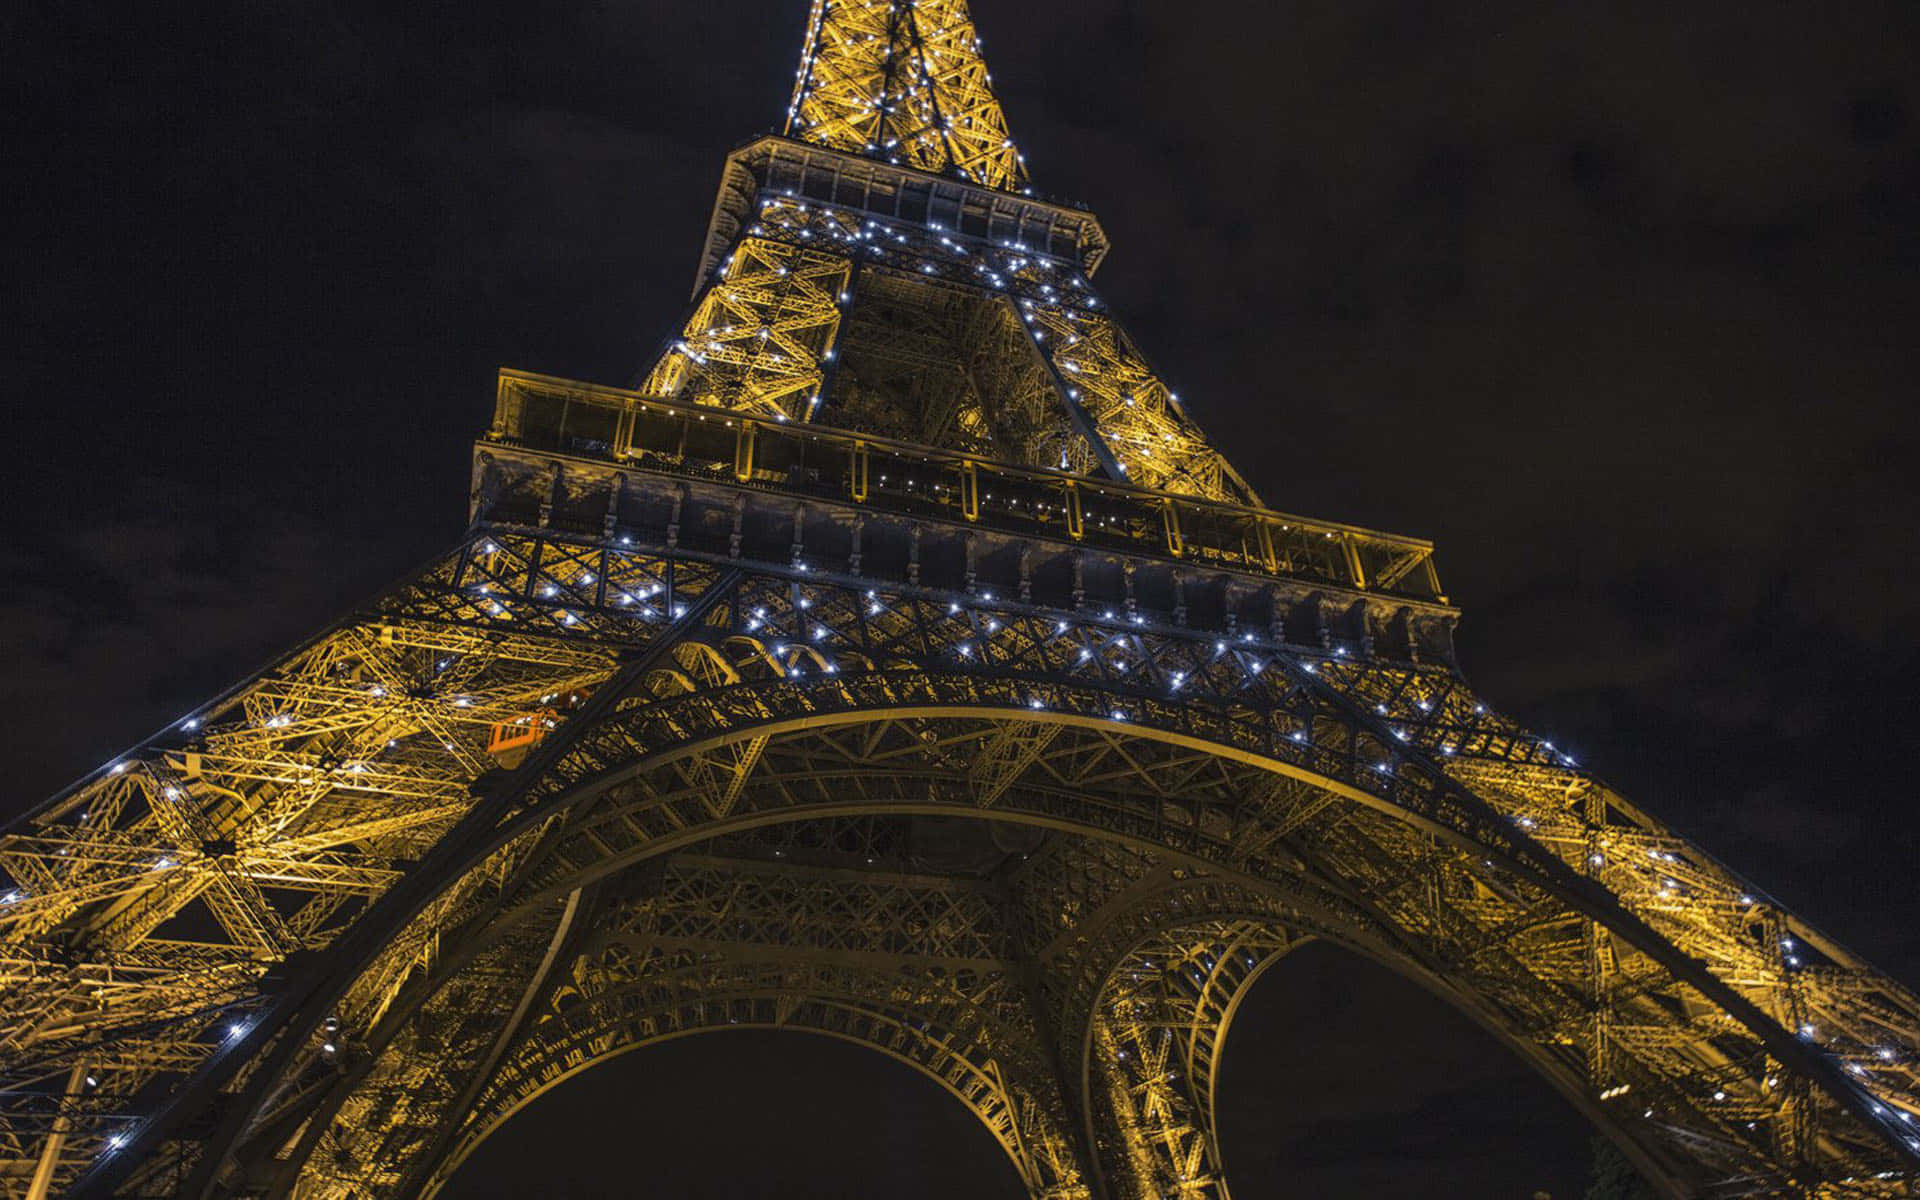 "The Charming City of Paris Under the Sky At Night" Wallpaper